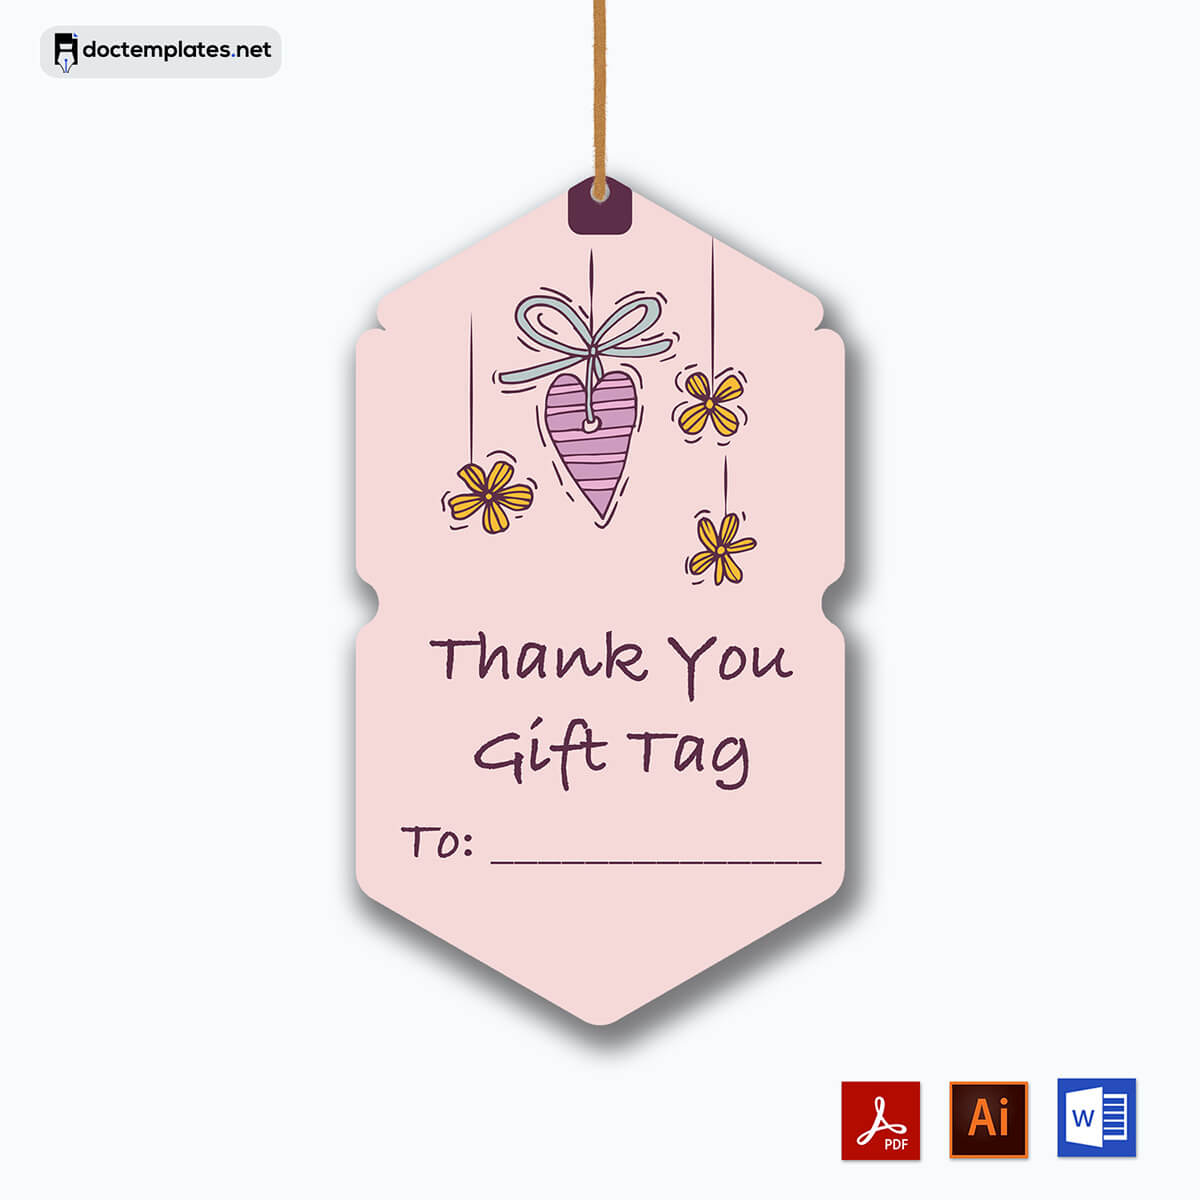 30 Exclusive Gift Tag Templates - Customizable and Print-Ready